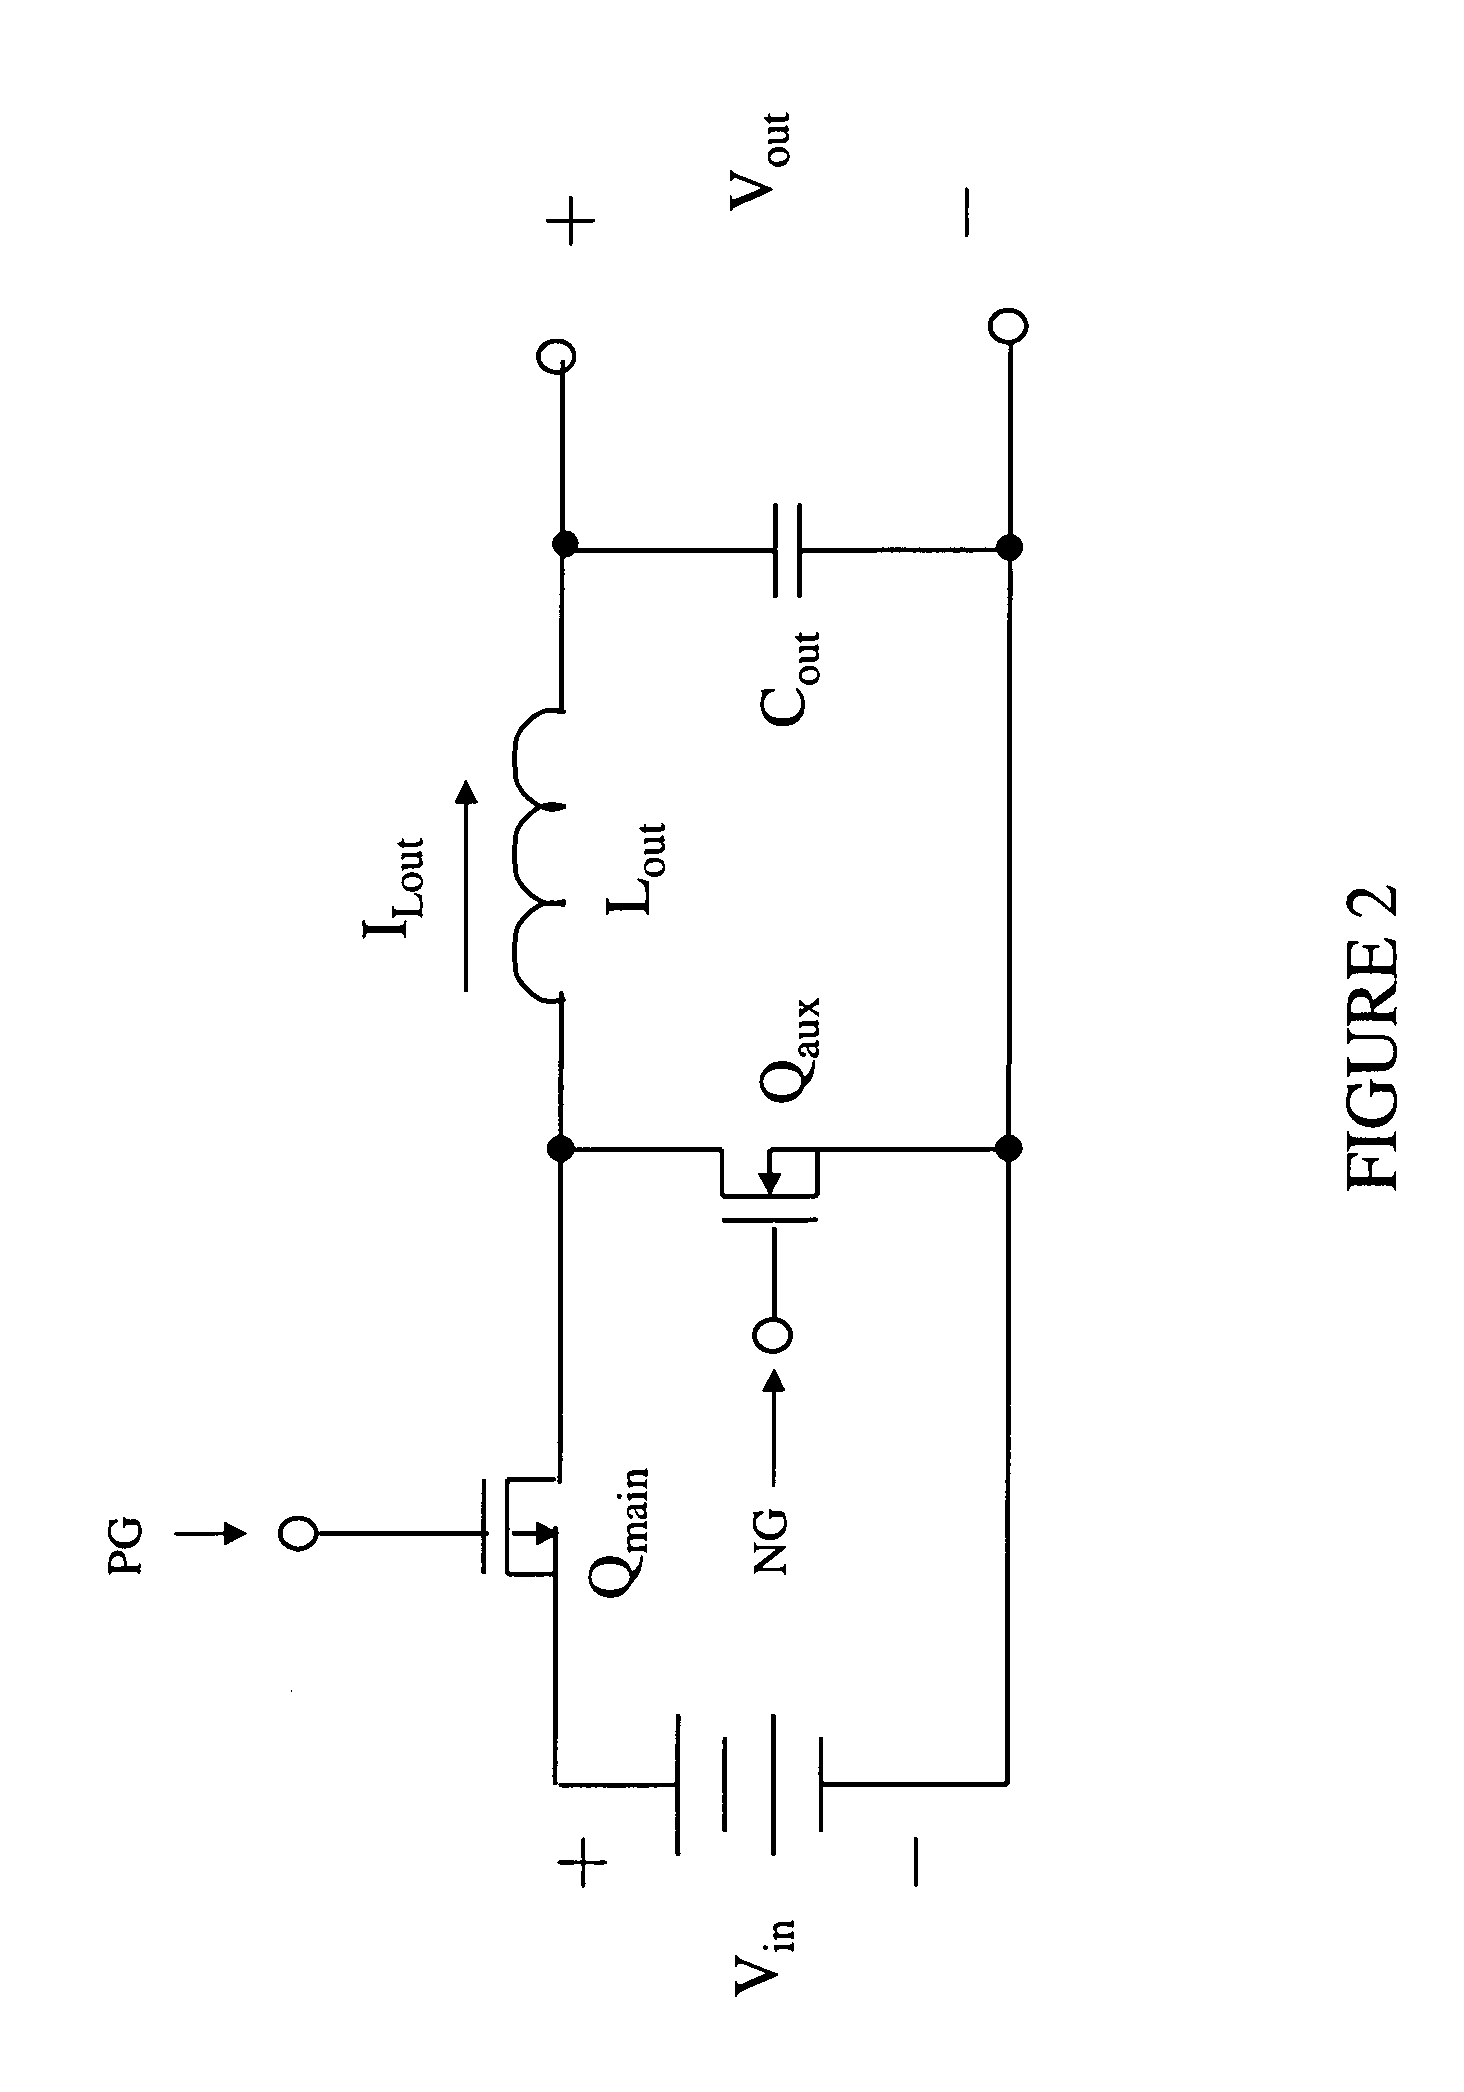 Power Converter Employing a Micromagnetic Device